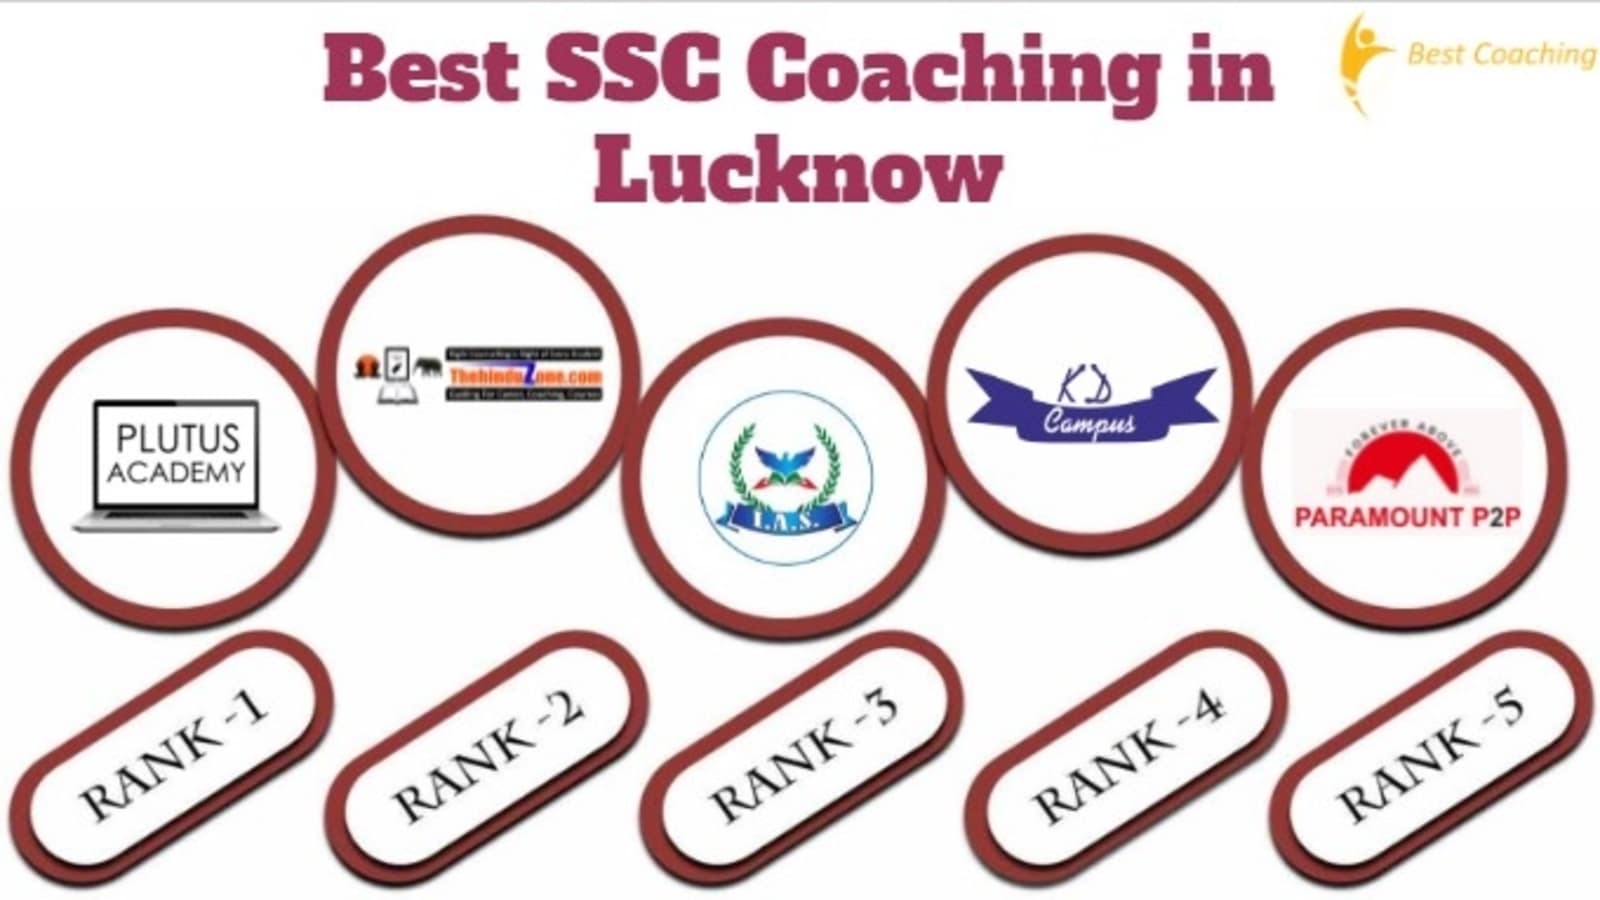 Best SSC Coaching in Lucknow